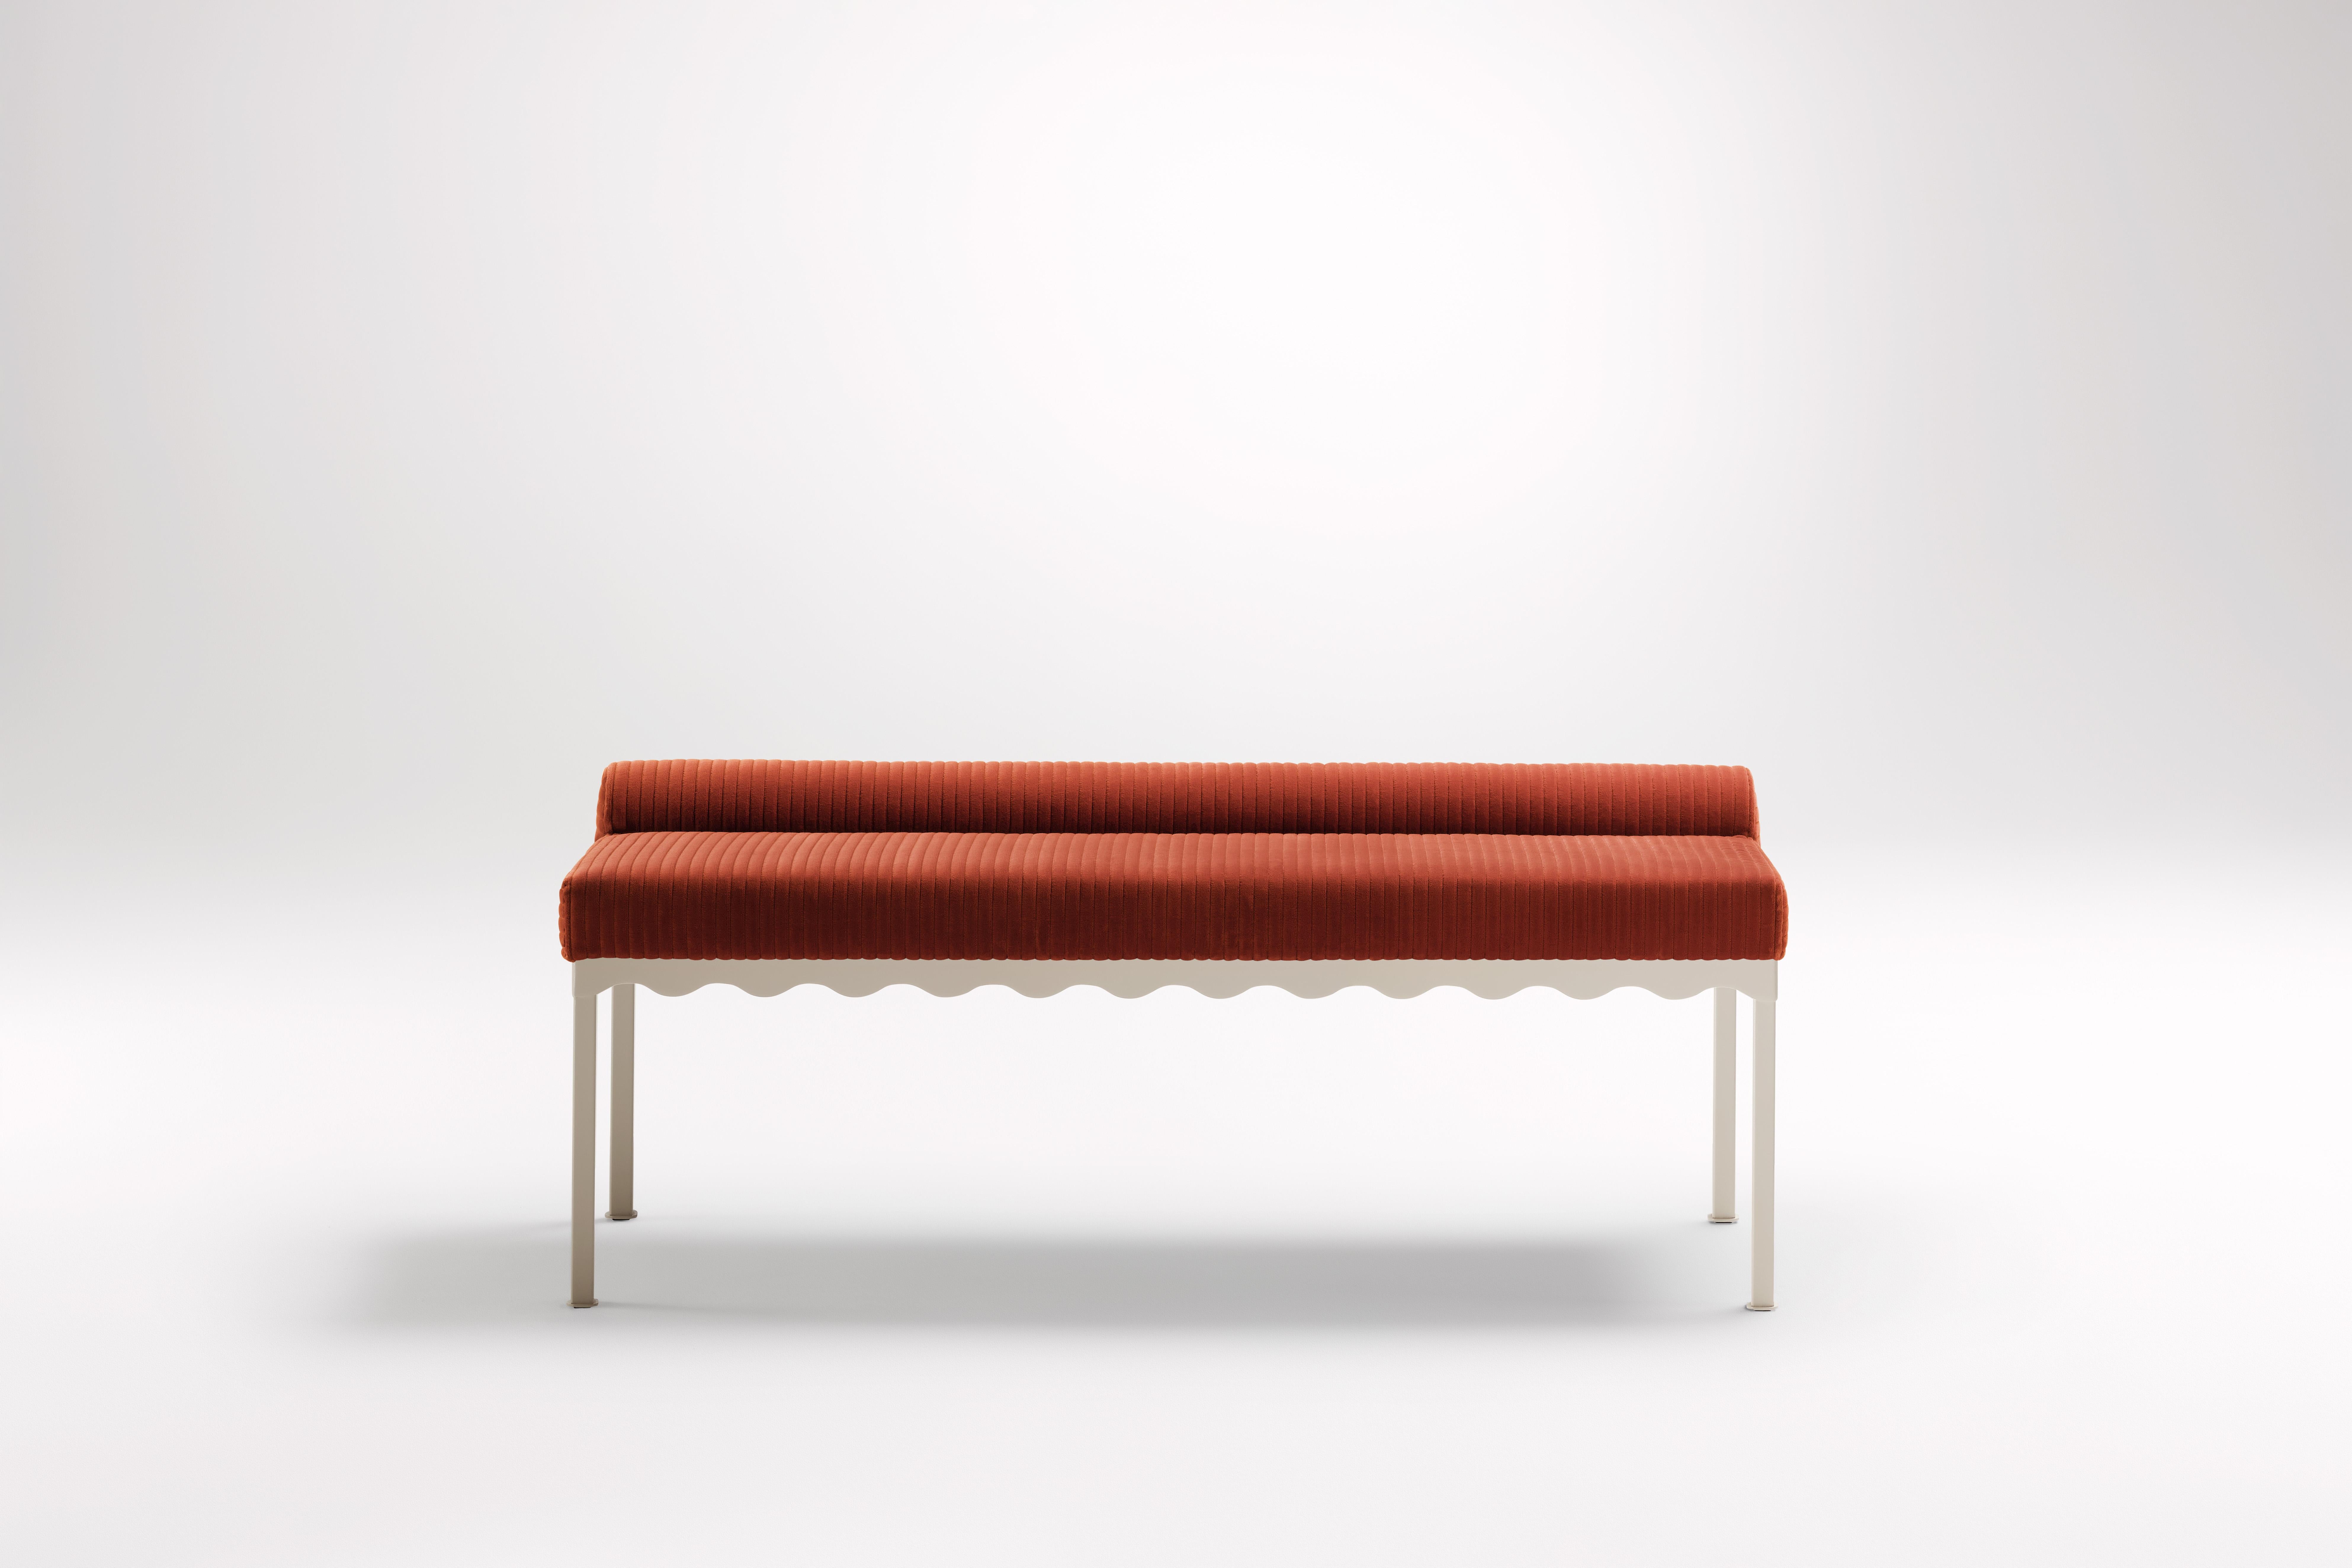 Sanguine Bellini 1340 Bench by Coco Flip
Dimensions: D 134 x W 54 x H 52.5 cm
Materials: Timber / Upholstered tops, Powder-coated steel frame. 
Weight: 20 kg
Frame Finishes: Textura Paperbark.

Coco Flip is a Melbourne based furniture and lighting